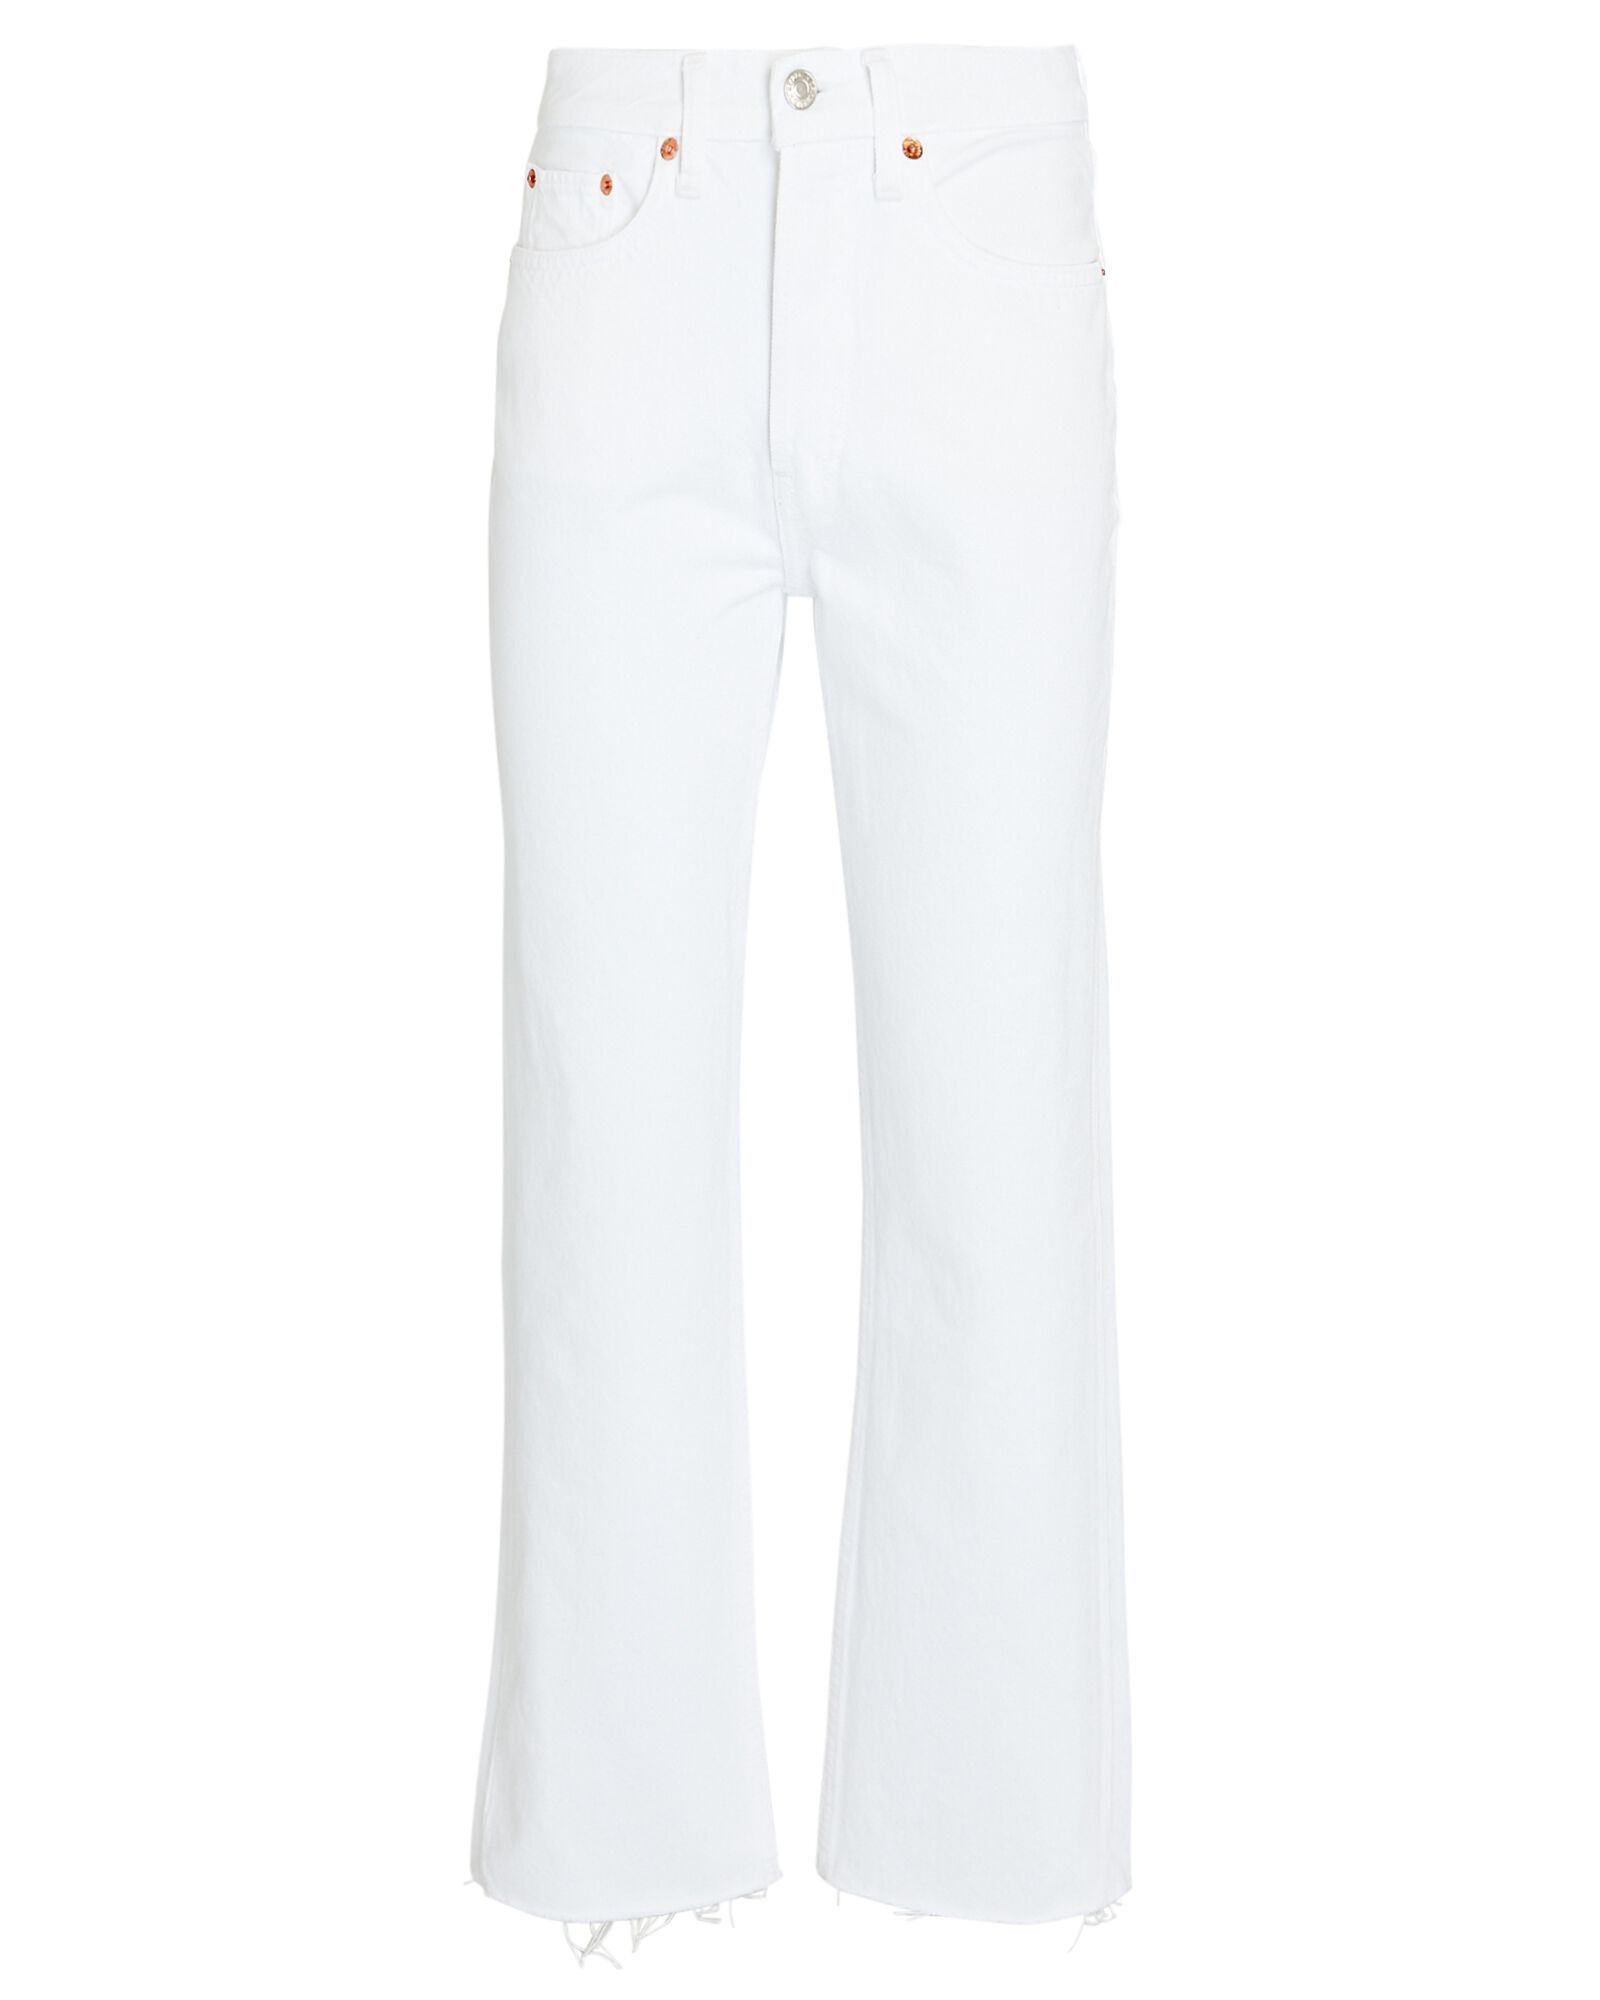 70s Stovepipe Jeans, White Jeans Winter, White Boots, White Booties, White Boots Outfit | INTERMIX